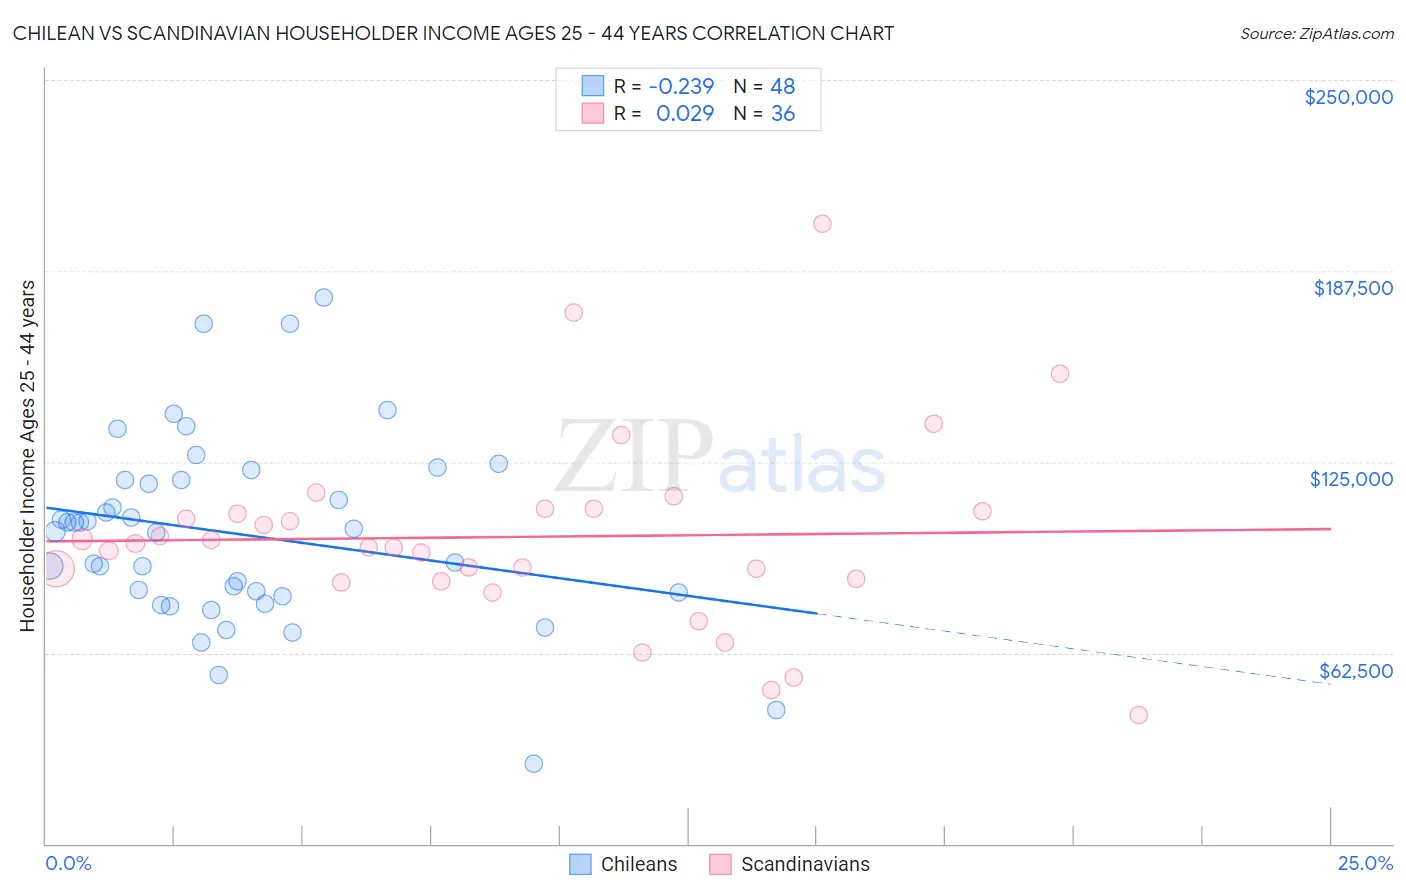 Chilean vs Scandinavian Householder Income Ages 25 - 44 years